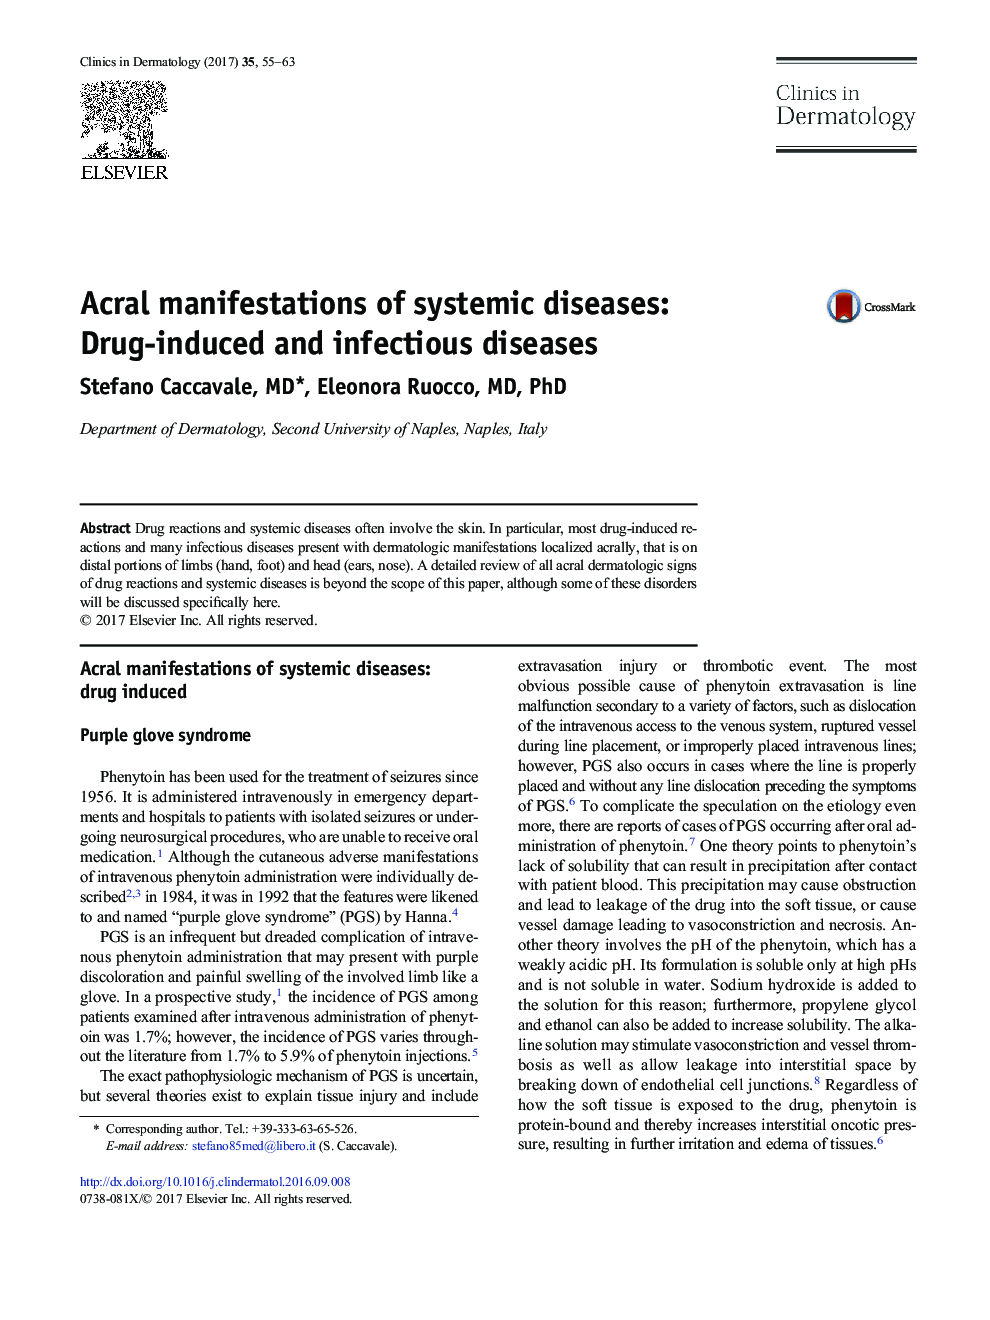 Acral manifestations of systemic diseases: Drug-induced and infectious diseases